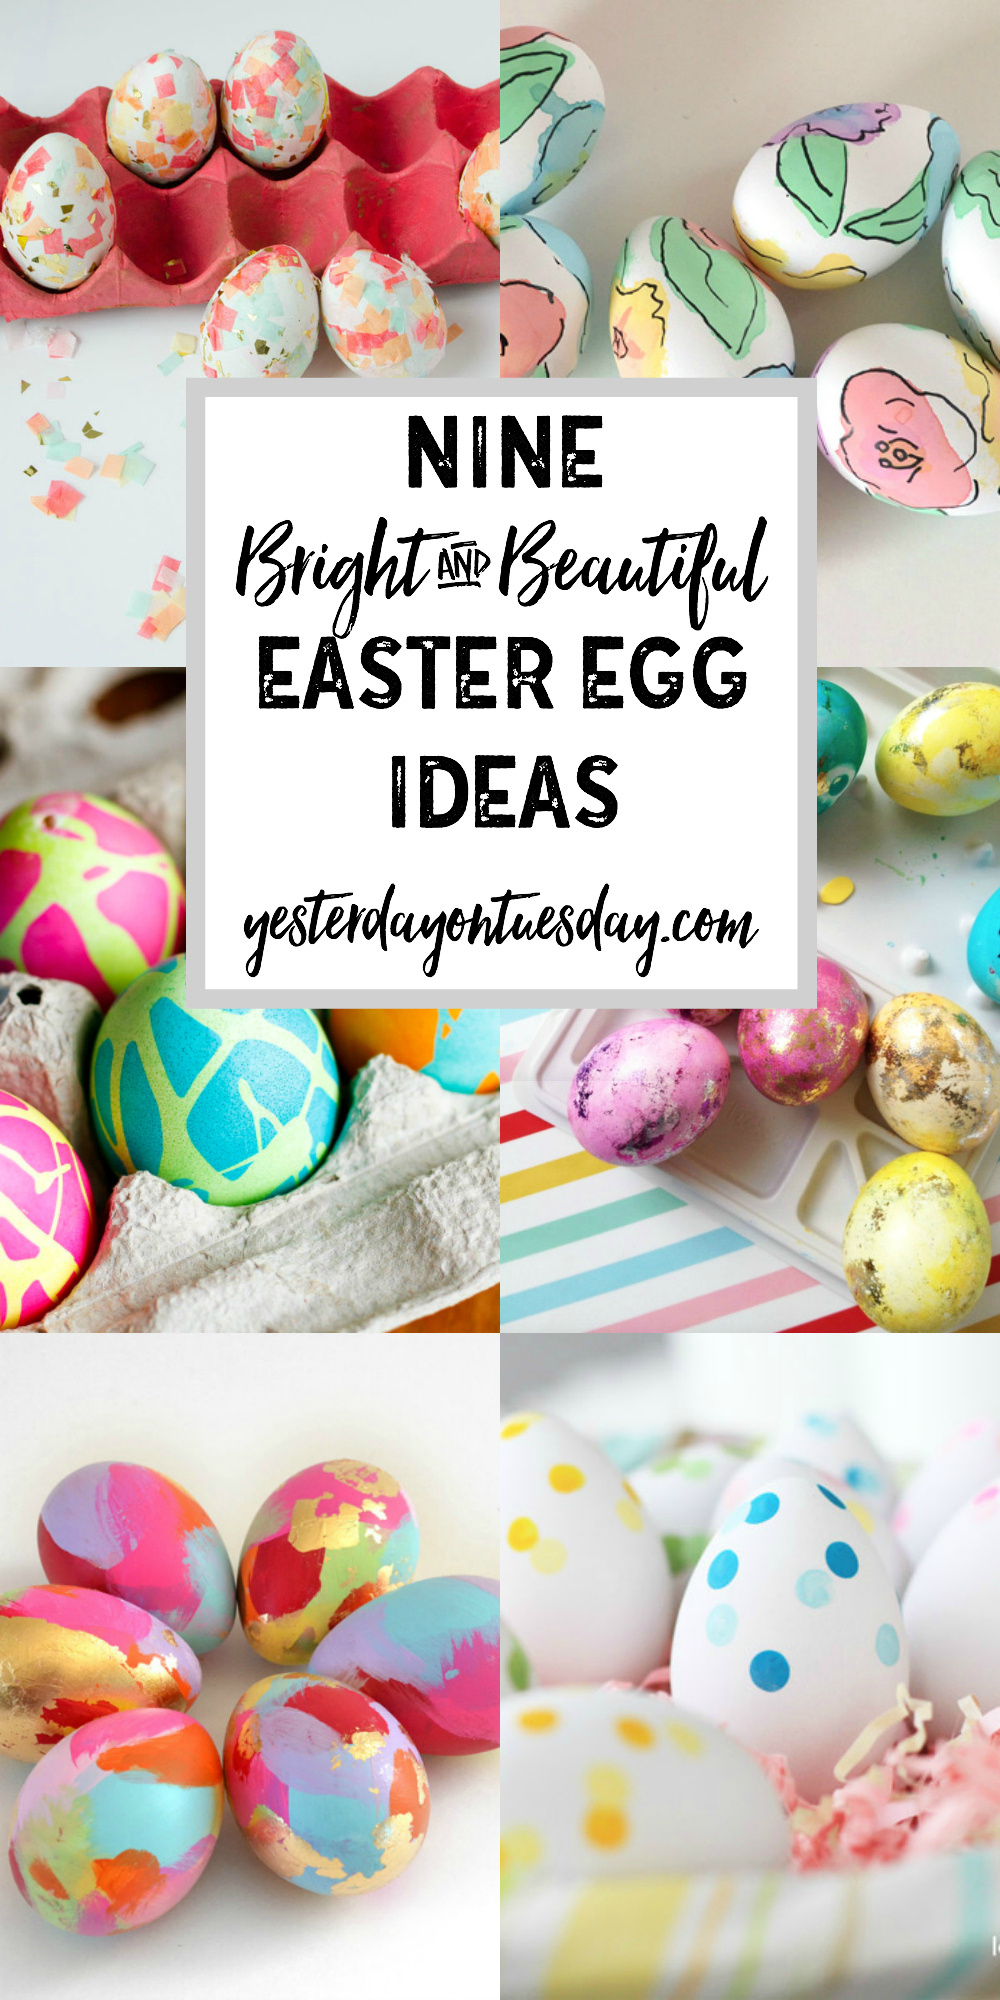 9 Bright and Beautiful Easter Egg Ideas